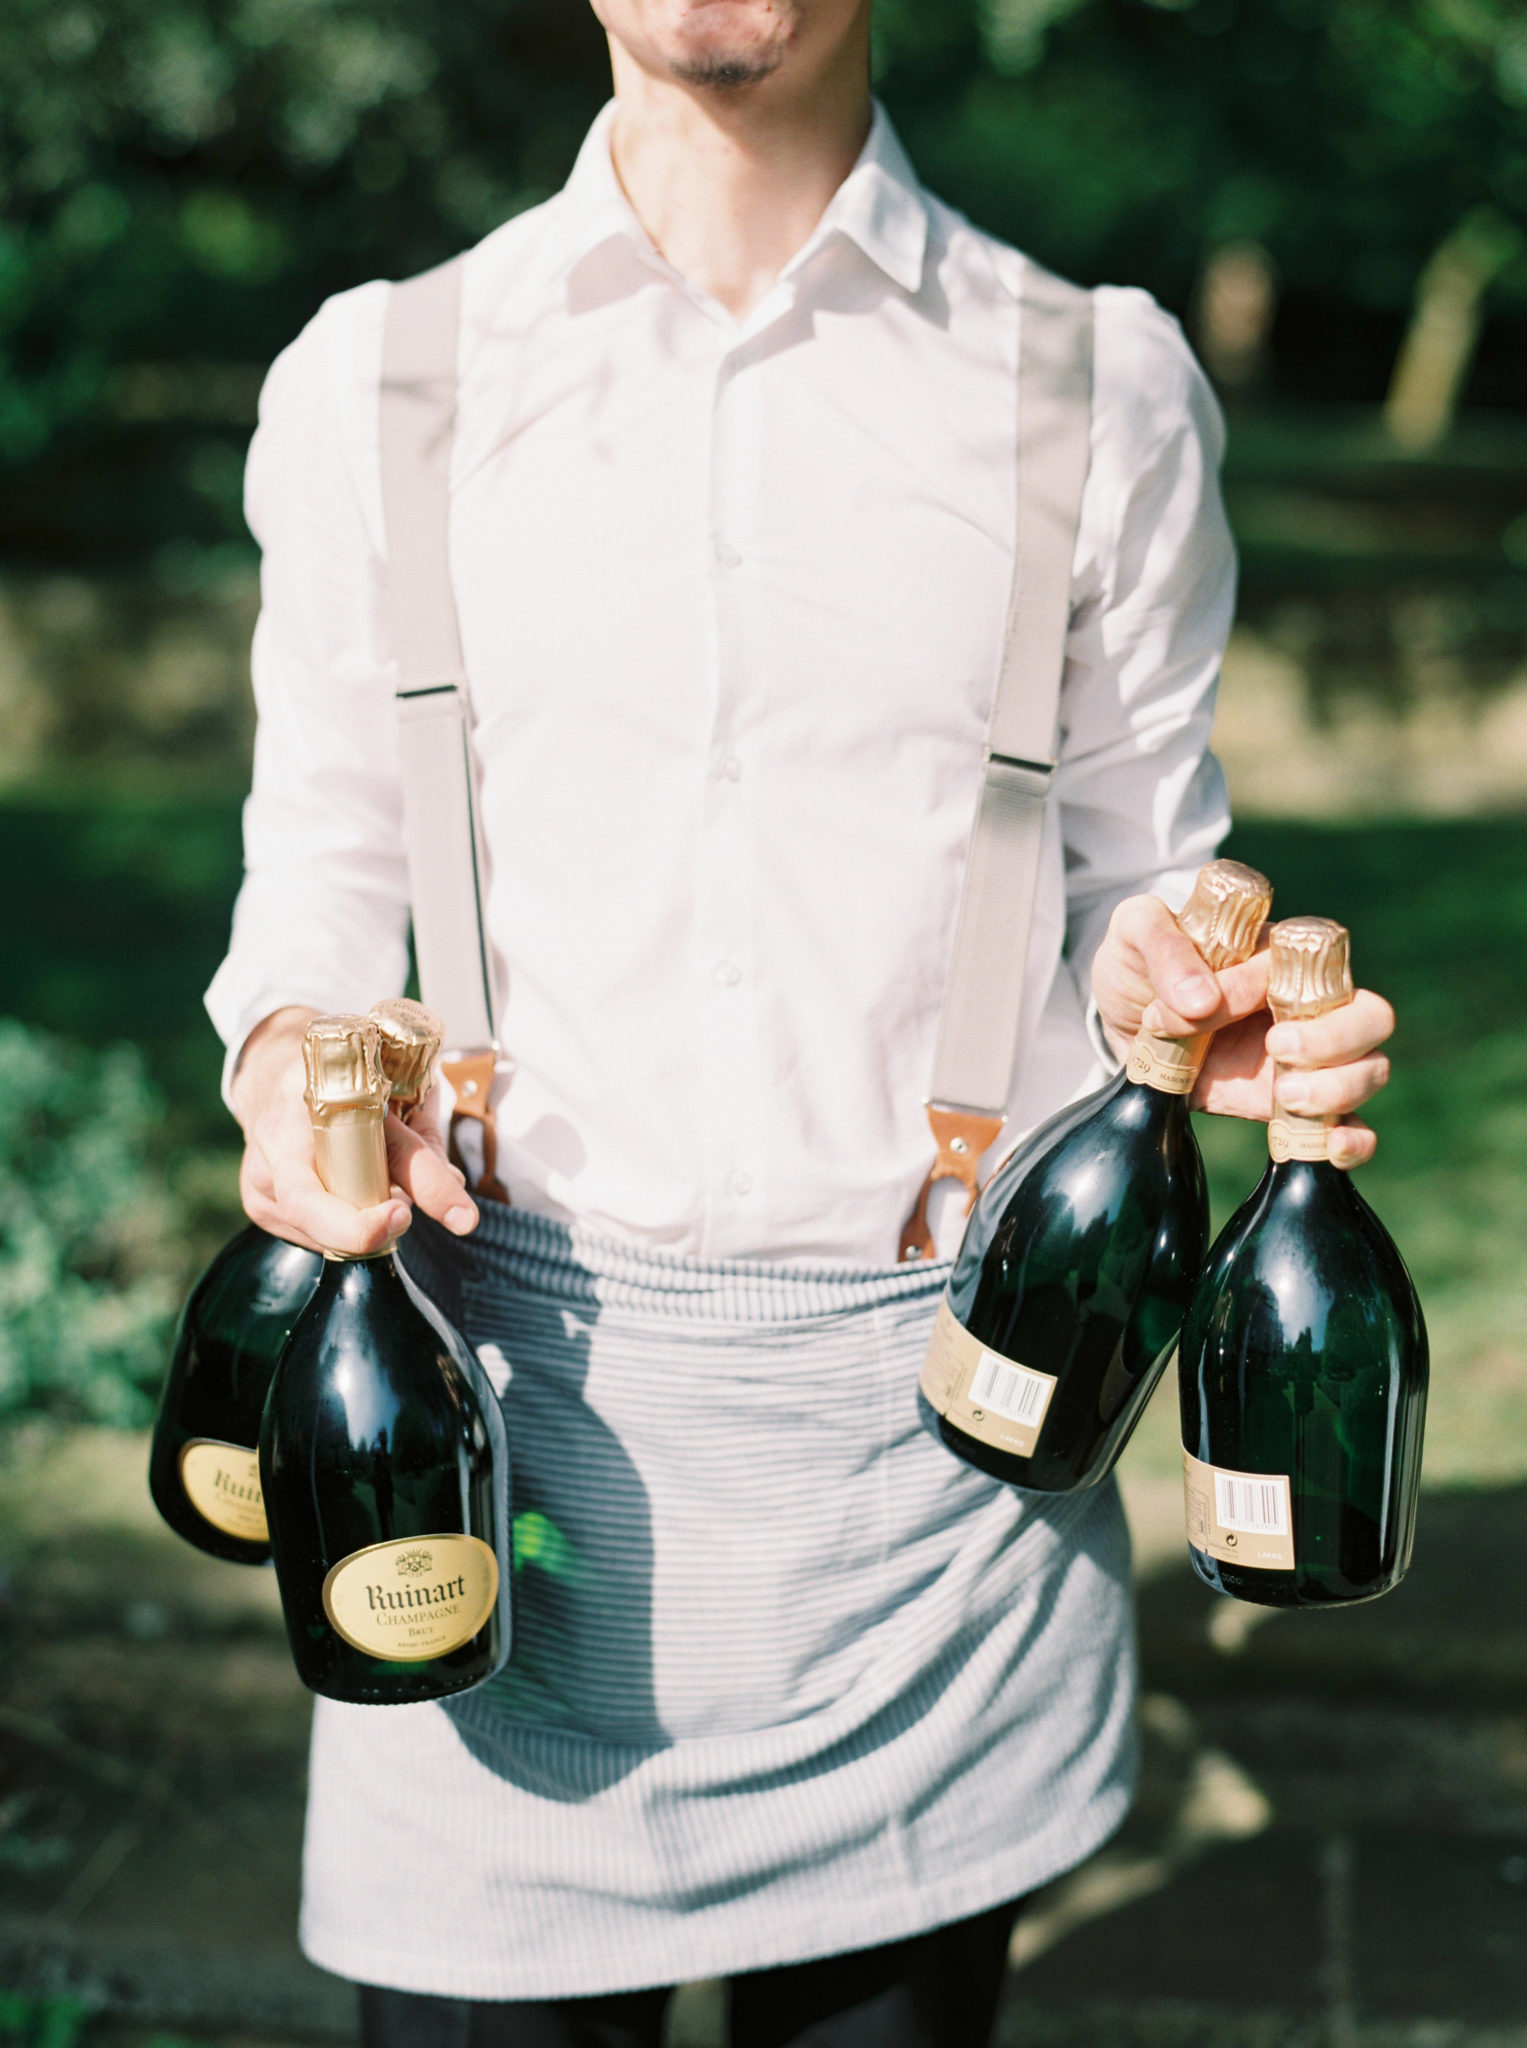 Waiter carrying champagne bottles at a BBQ wedding